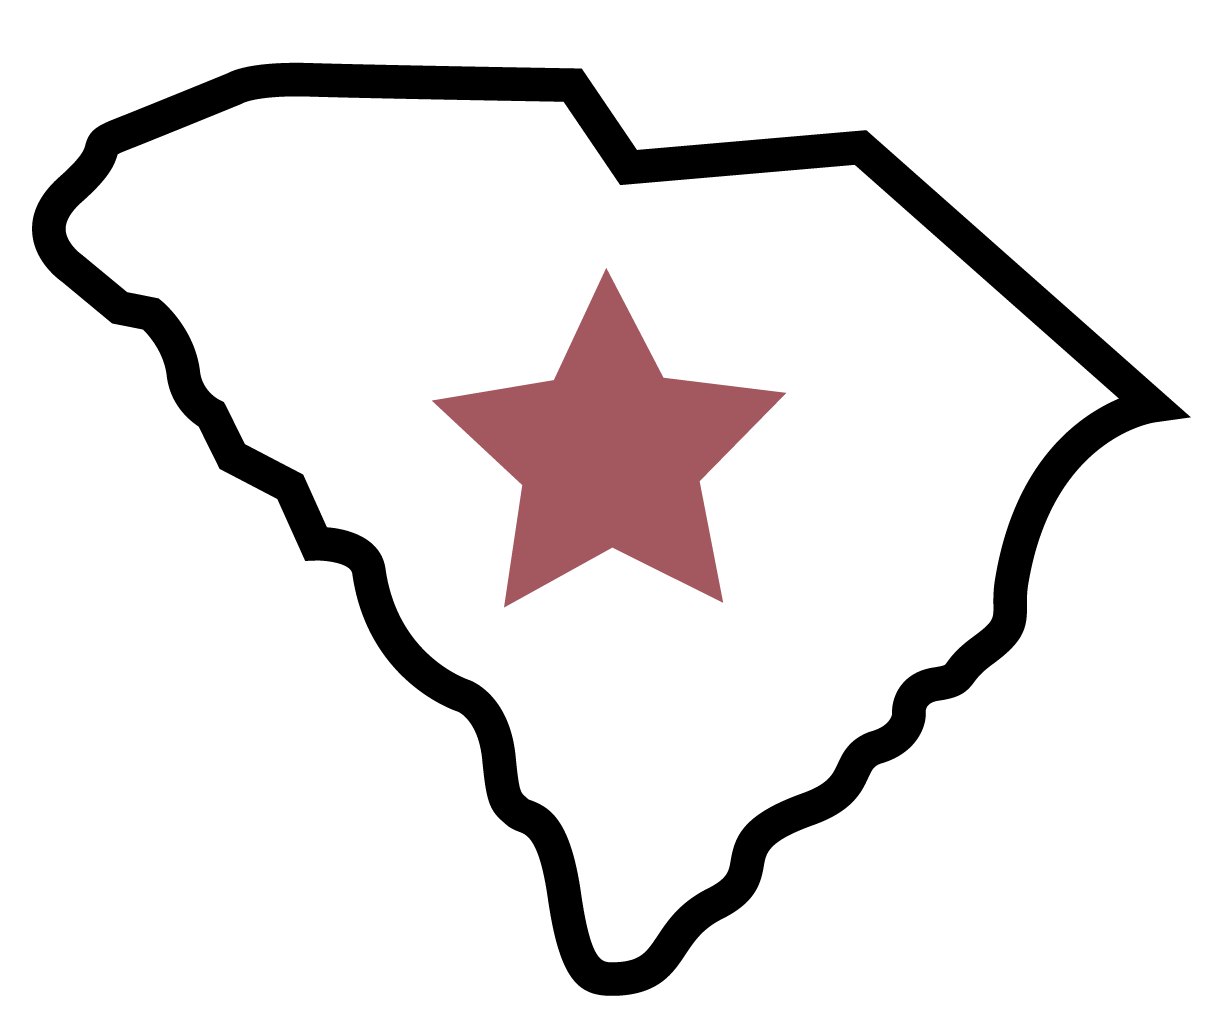 Outline of SC with star icon